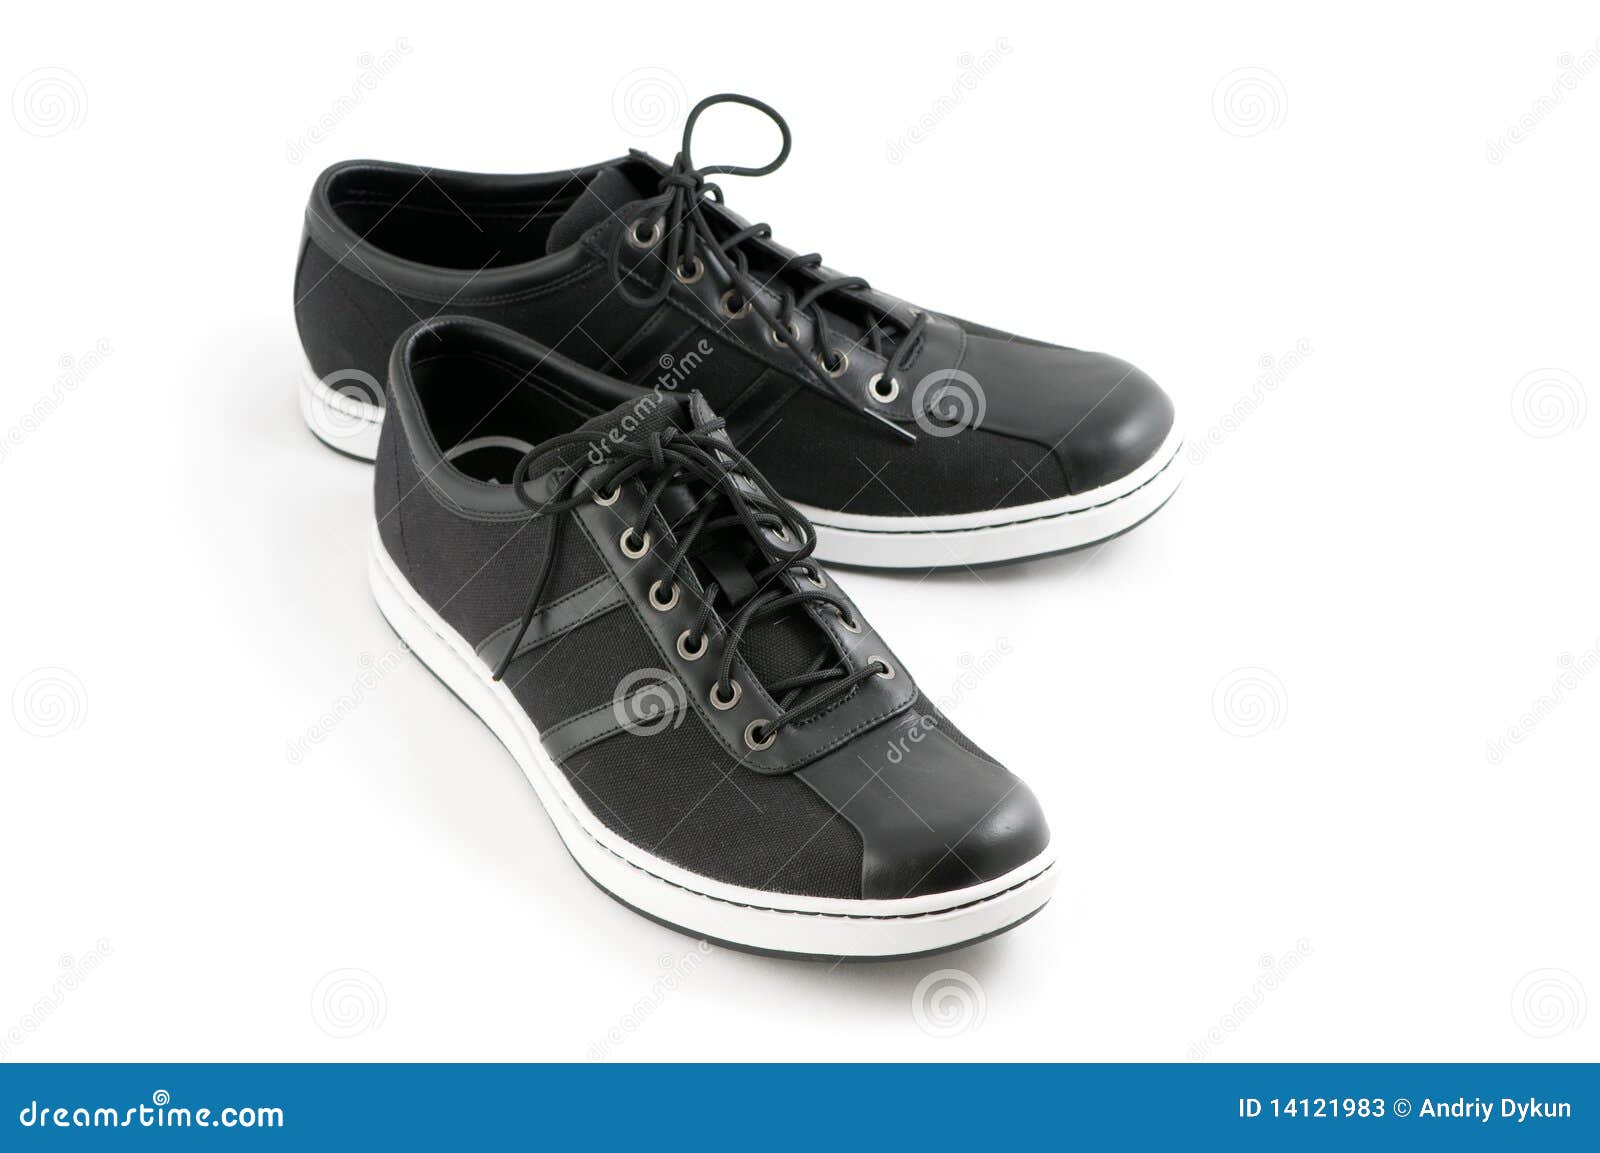 Men s casual black shoes stock image. Image of formalwear - 14121983